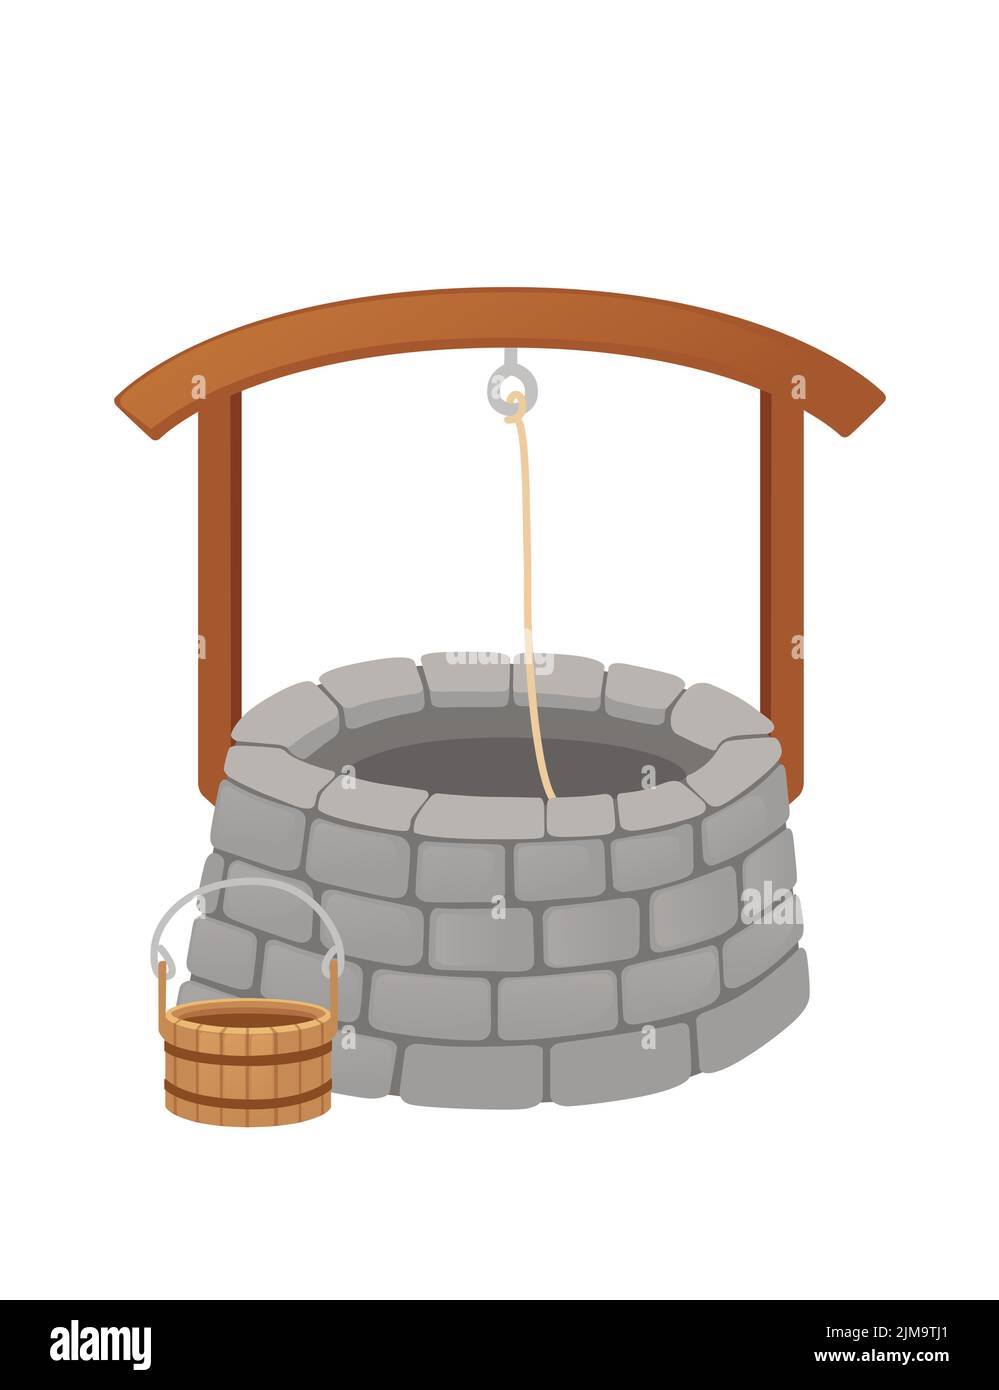 Stone well with rope and bucket medieval design vector illustration isolated on white background Stock Vector